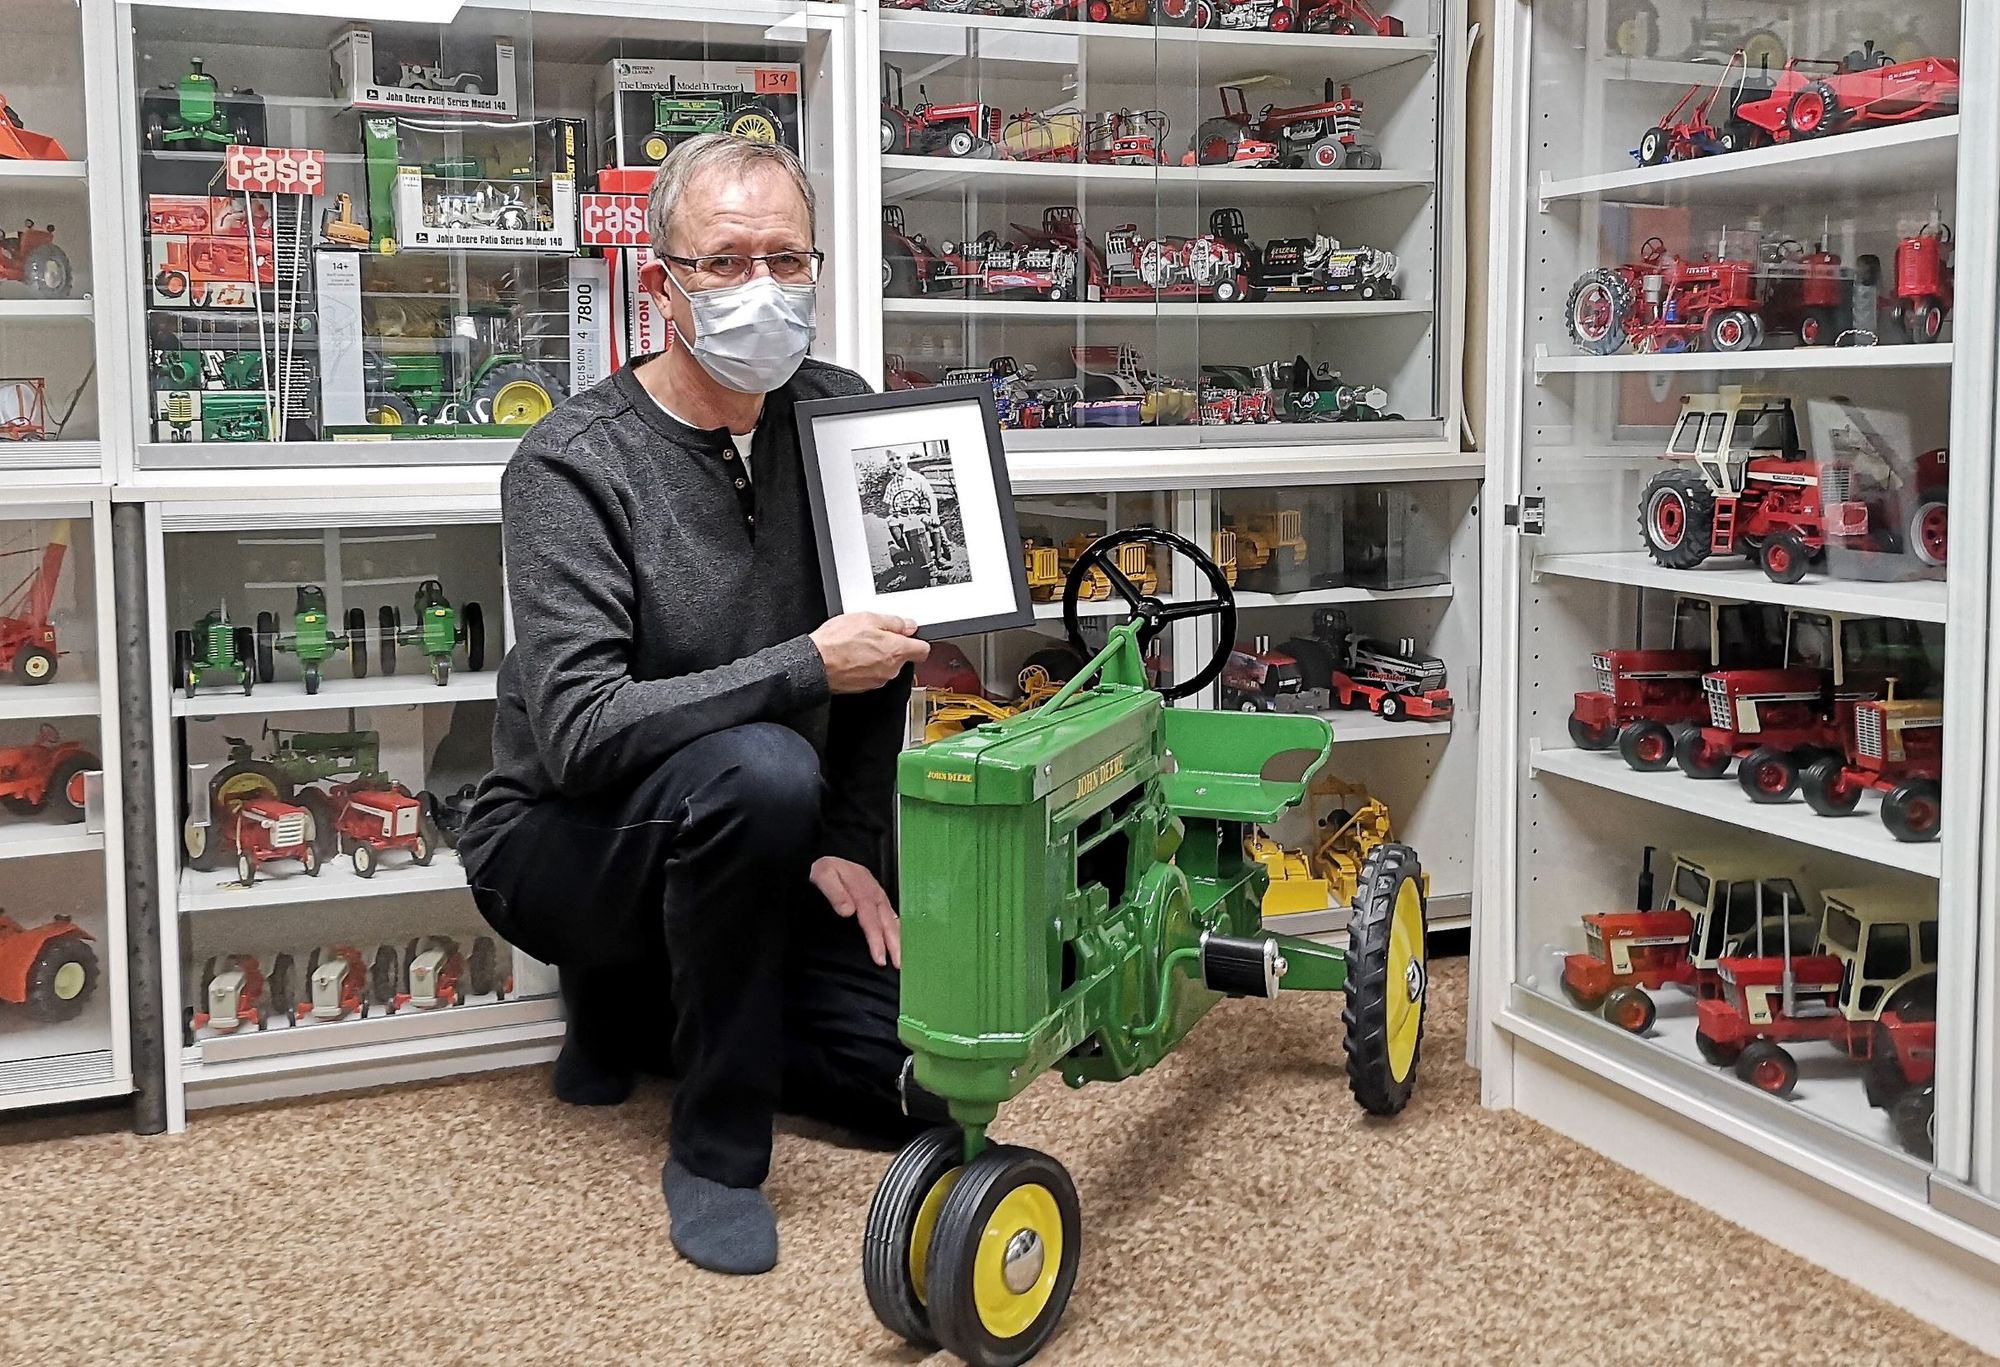 Massive toy tractor collection inspired by family farm equipment history and personal tragedies